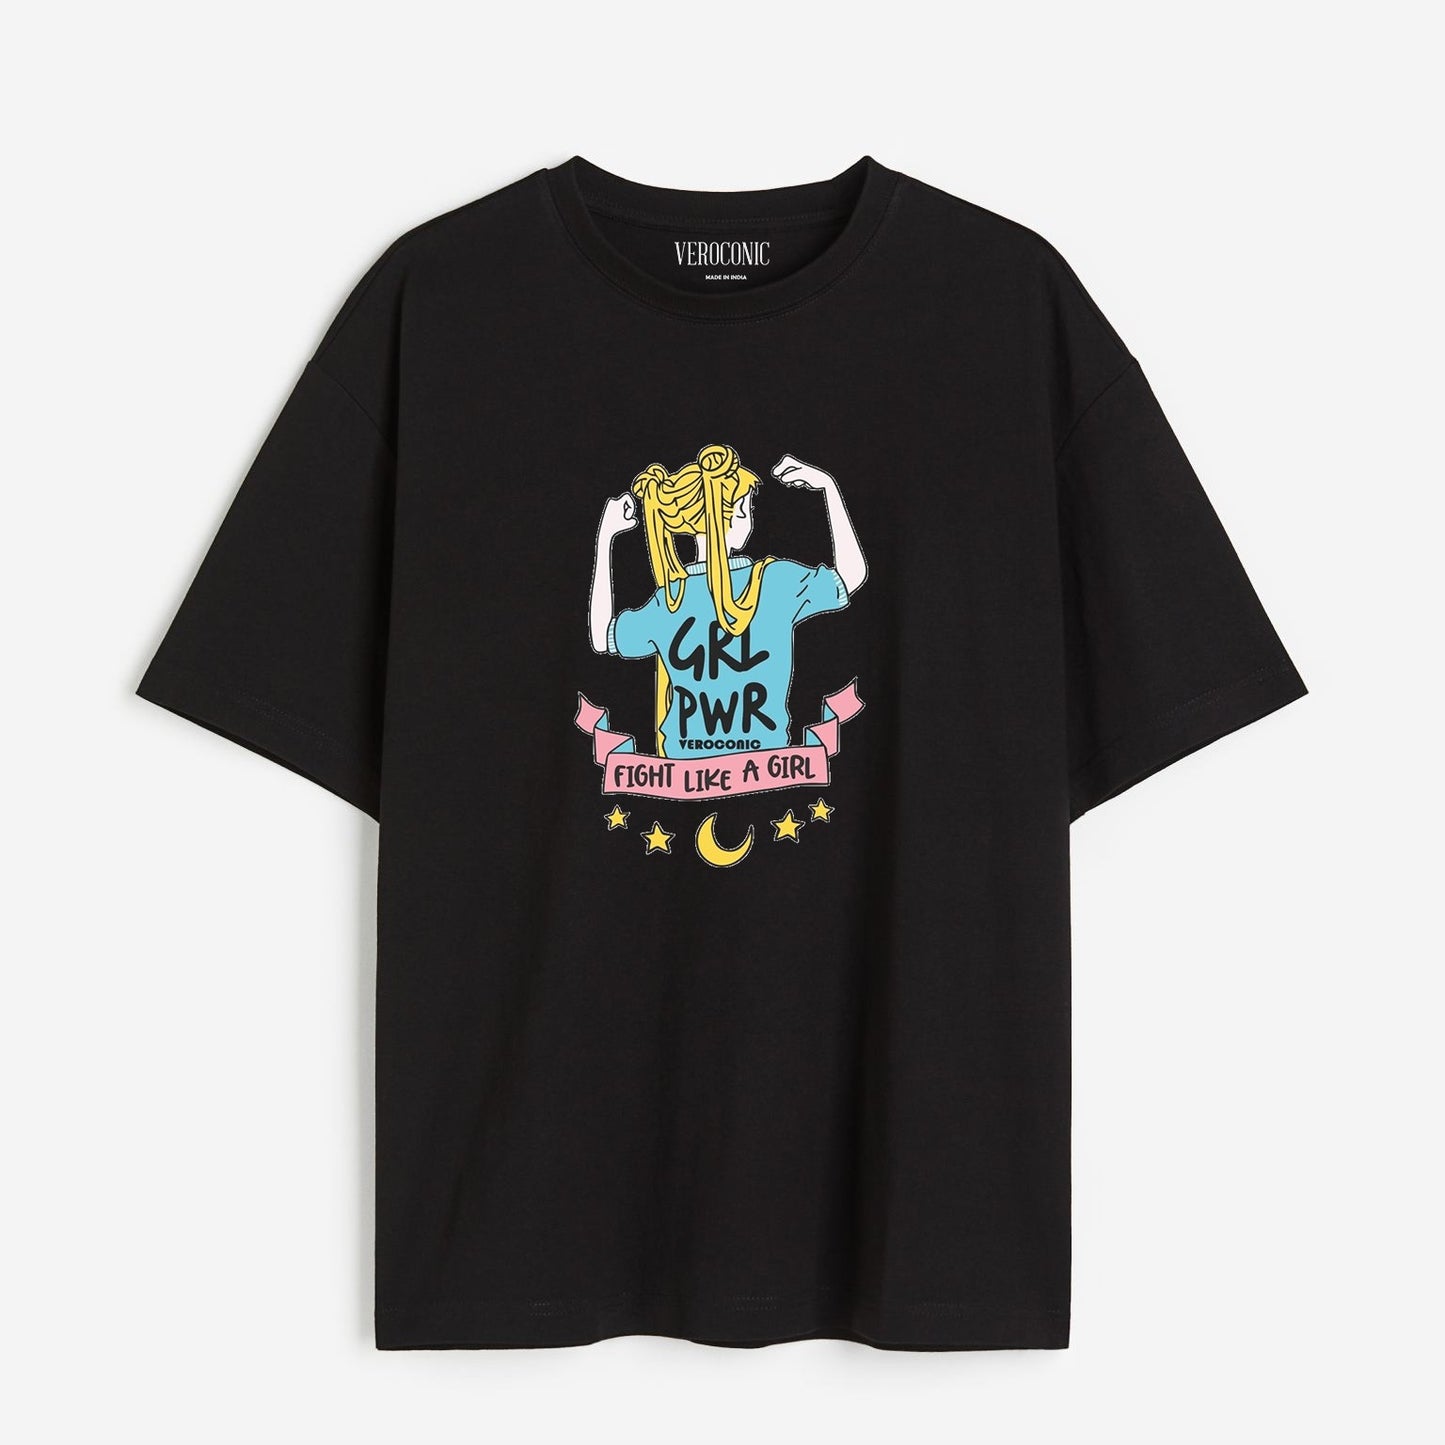 Girl Power Graphic Printed Oversized Black Cotton T-shirt